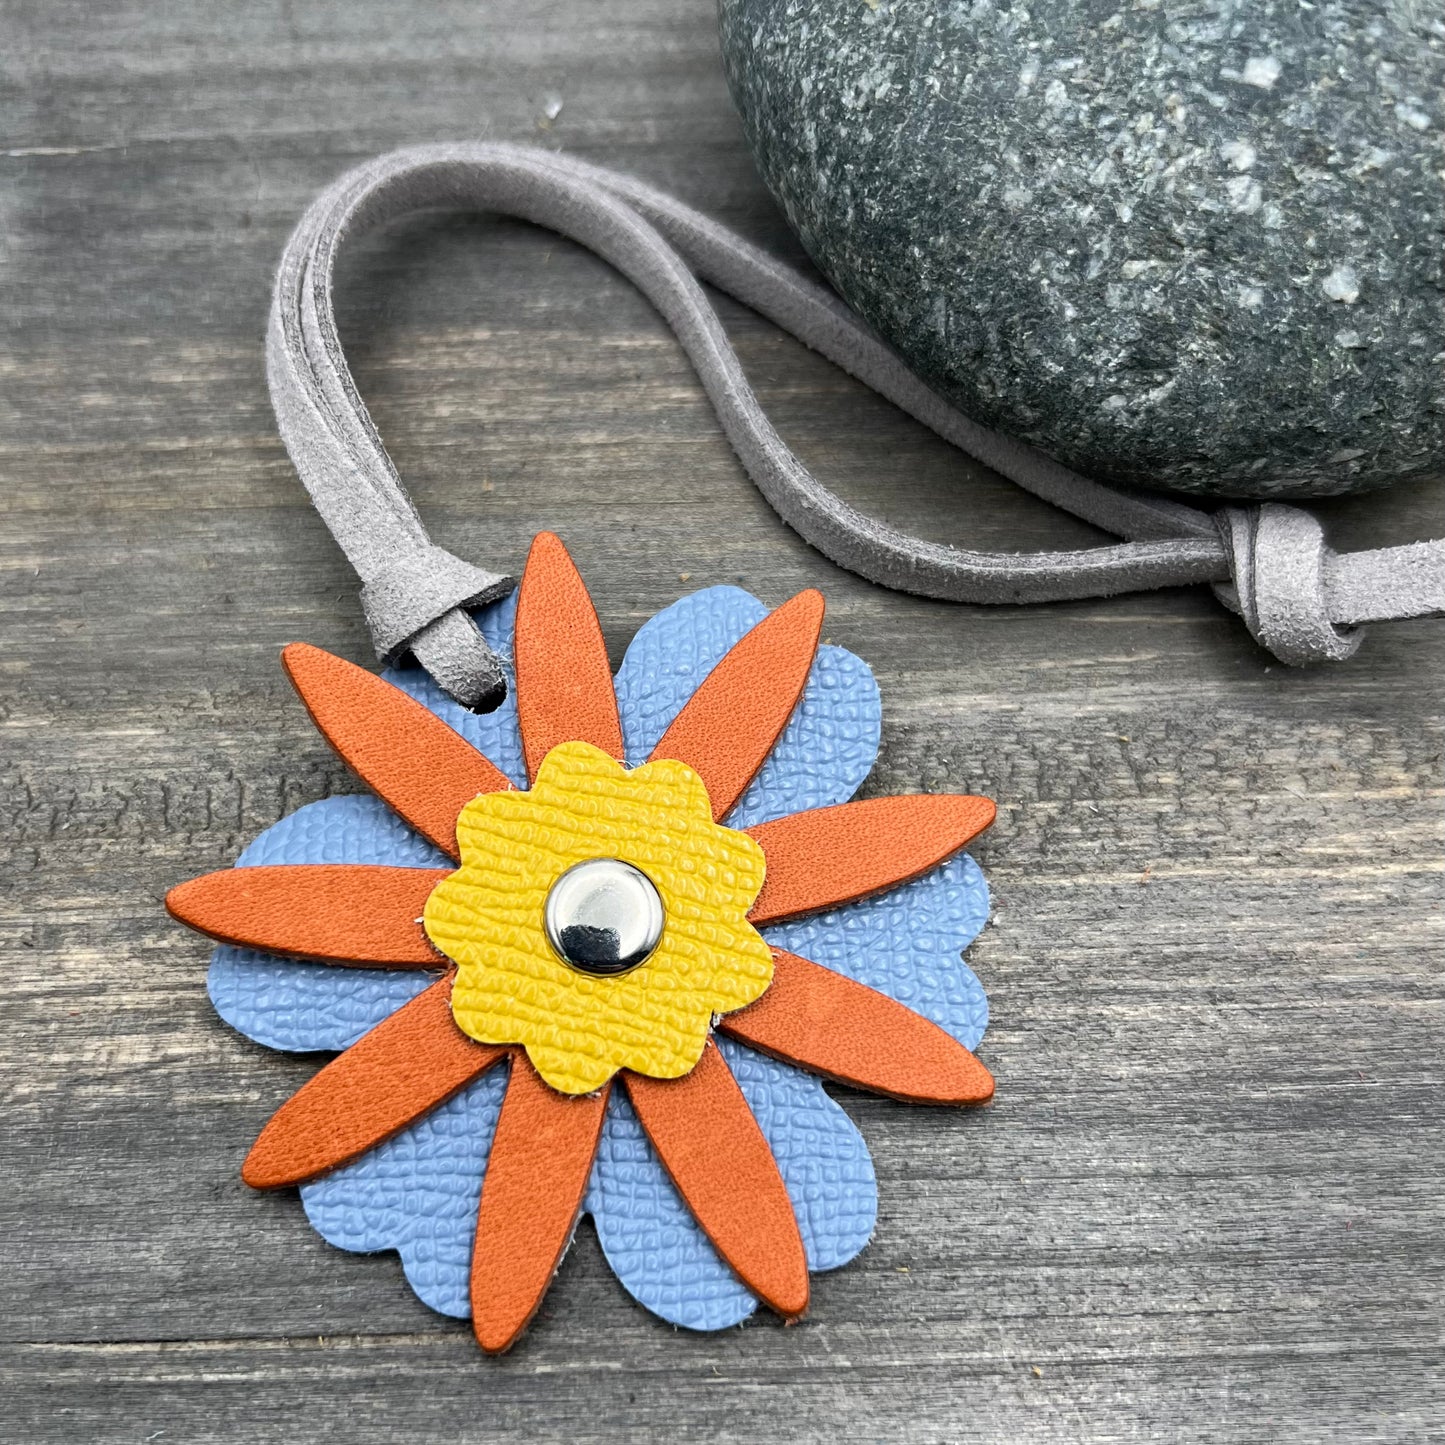 Small Leather Flower Purse Charm - Blue, Orange and Yellow